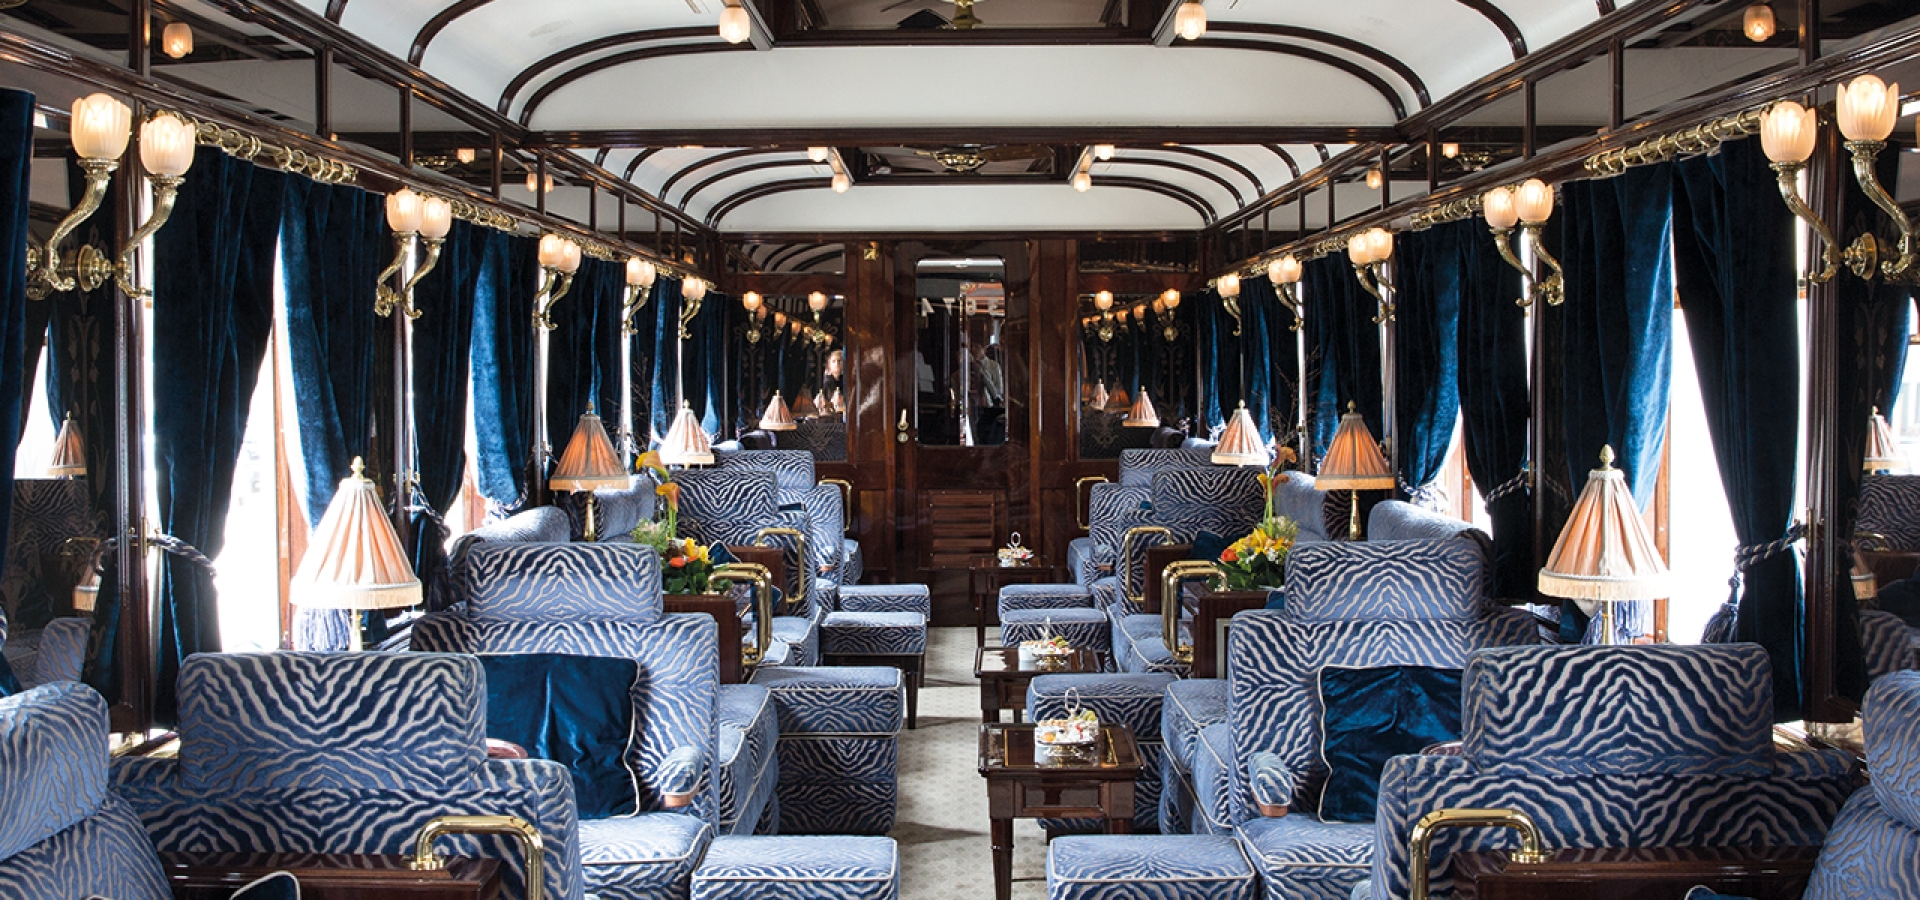 Paris and Budapest with the Venice Simplon-Orient-Express